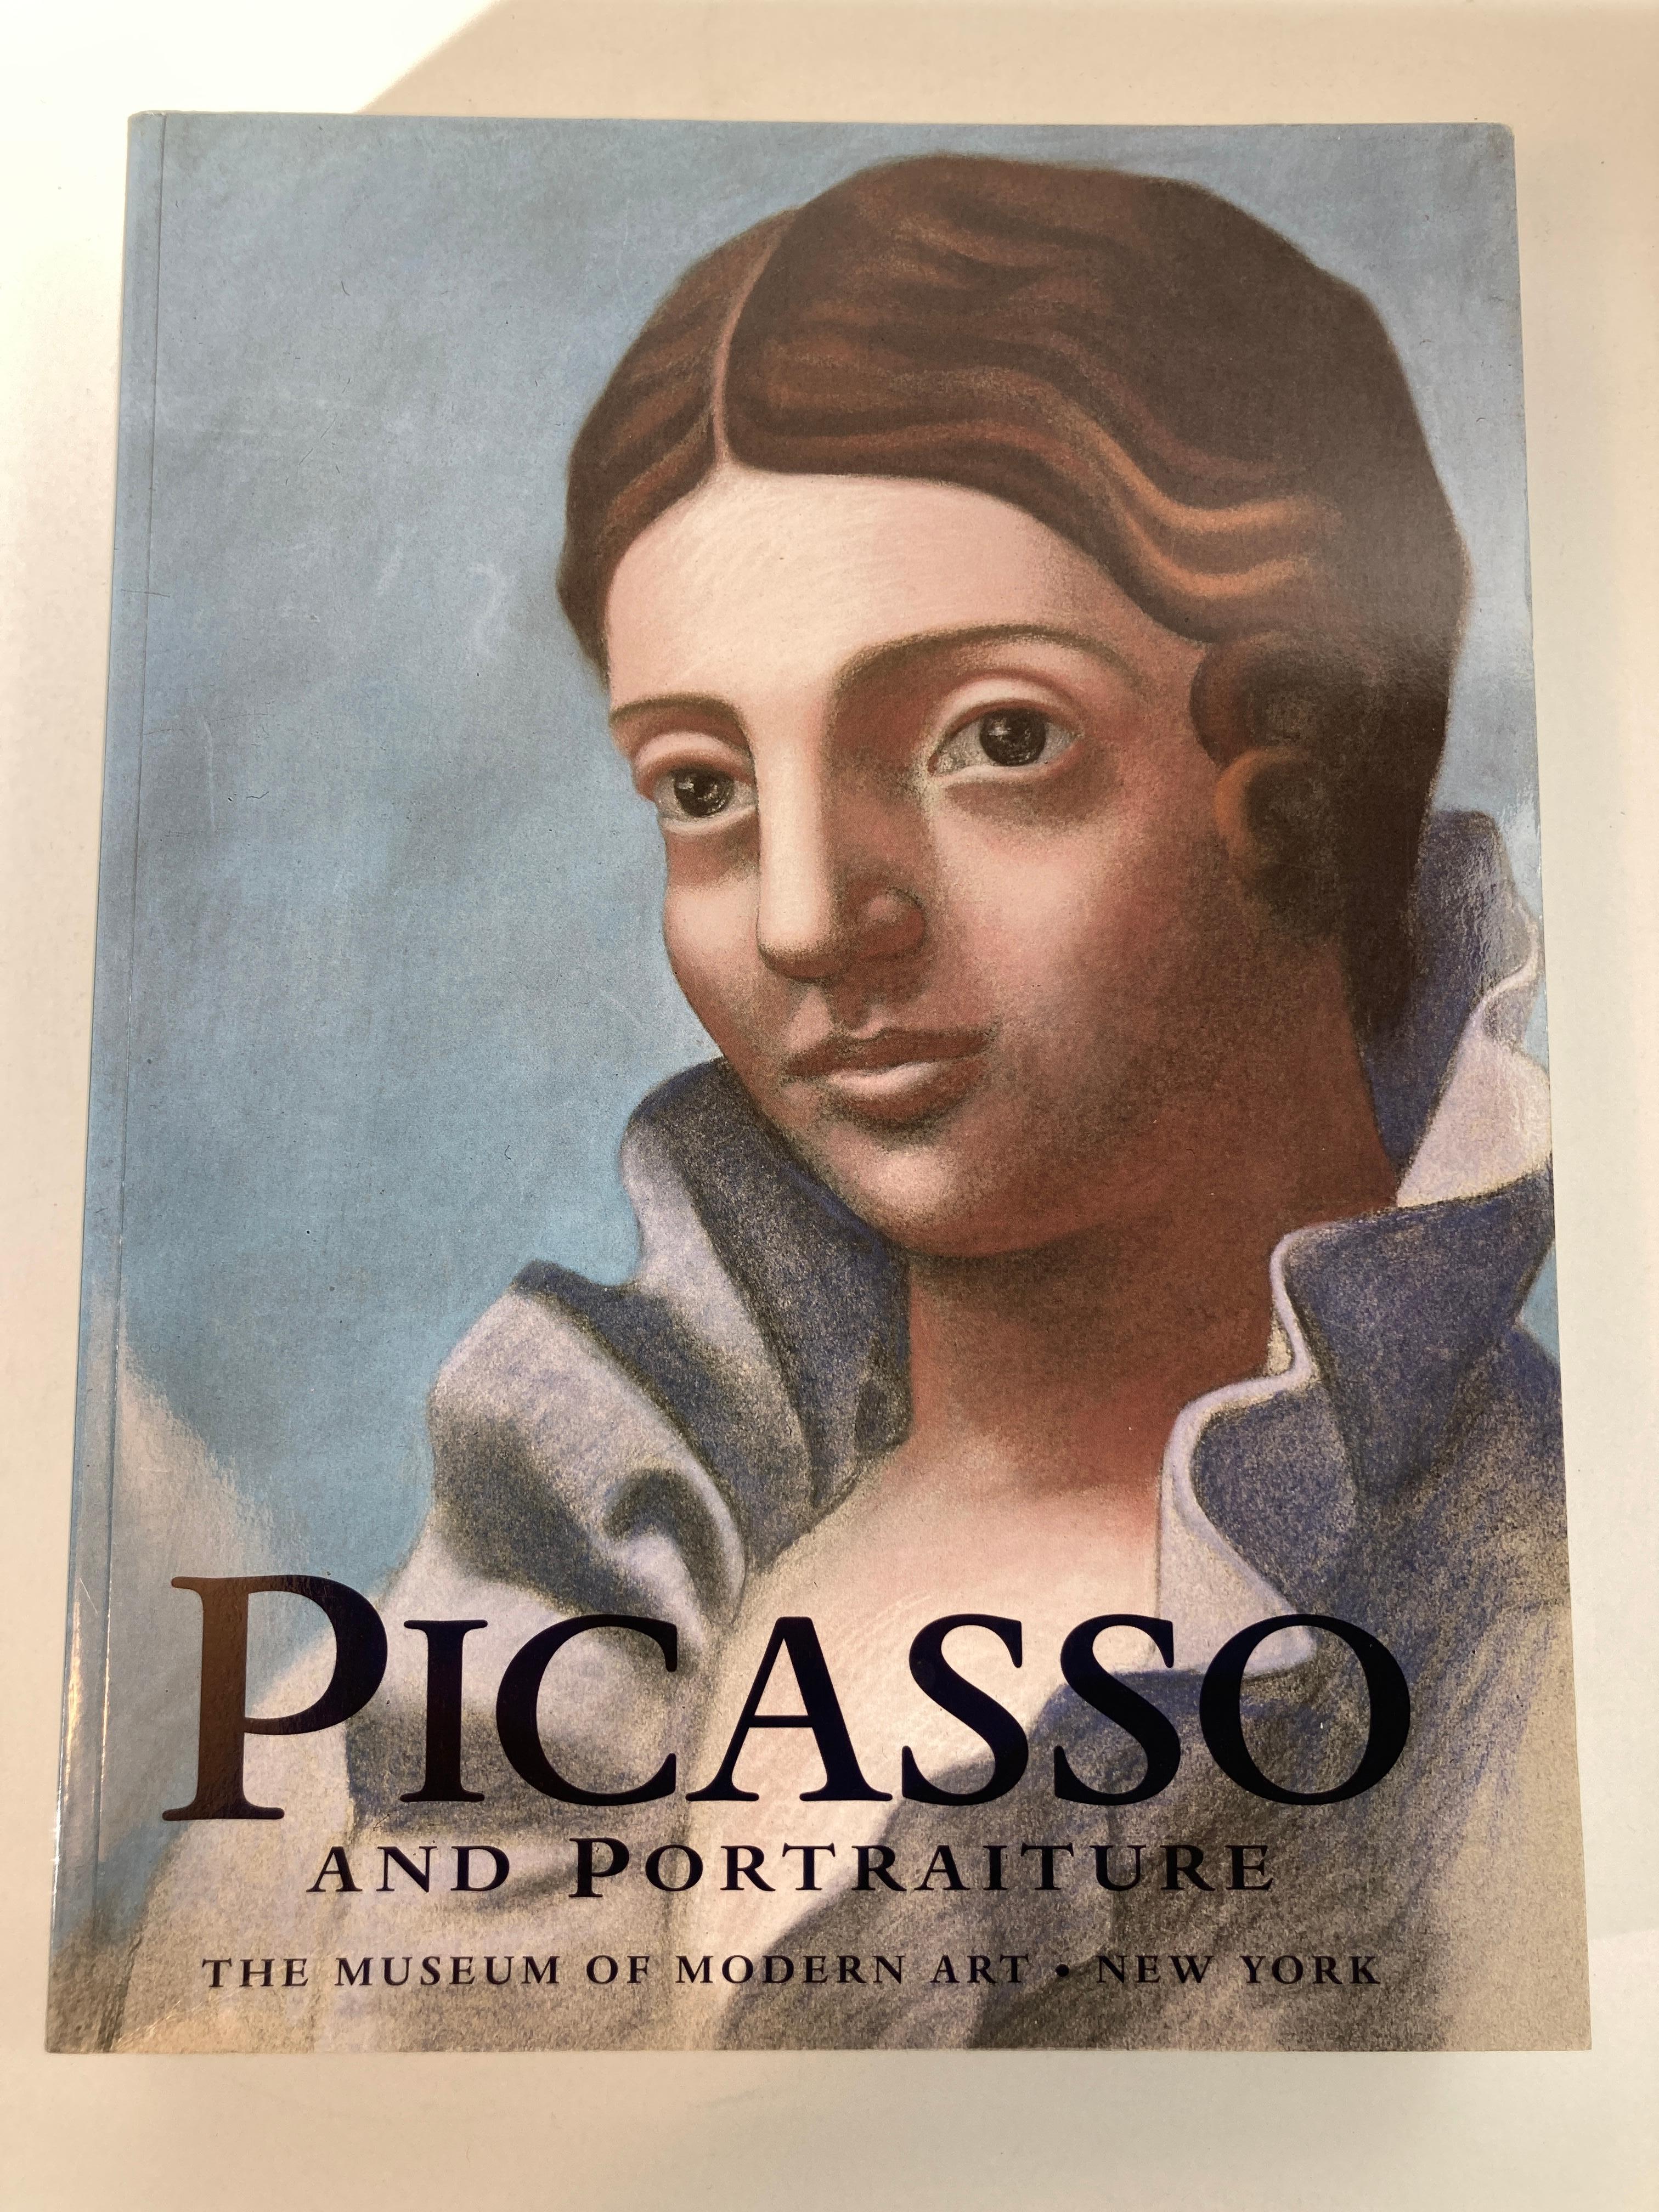 Picasso and Portraiture: Representation and transformation By Rubin, William, Editor; with essays by Anne Baldassari. by Pablo Picasso, Anne Baldassari, Pierre Daix, Michael C. Fitzgerald, Brigitte Leal, Marilyn McCully, Kirk Varnedoe, Robert